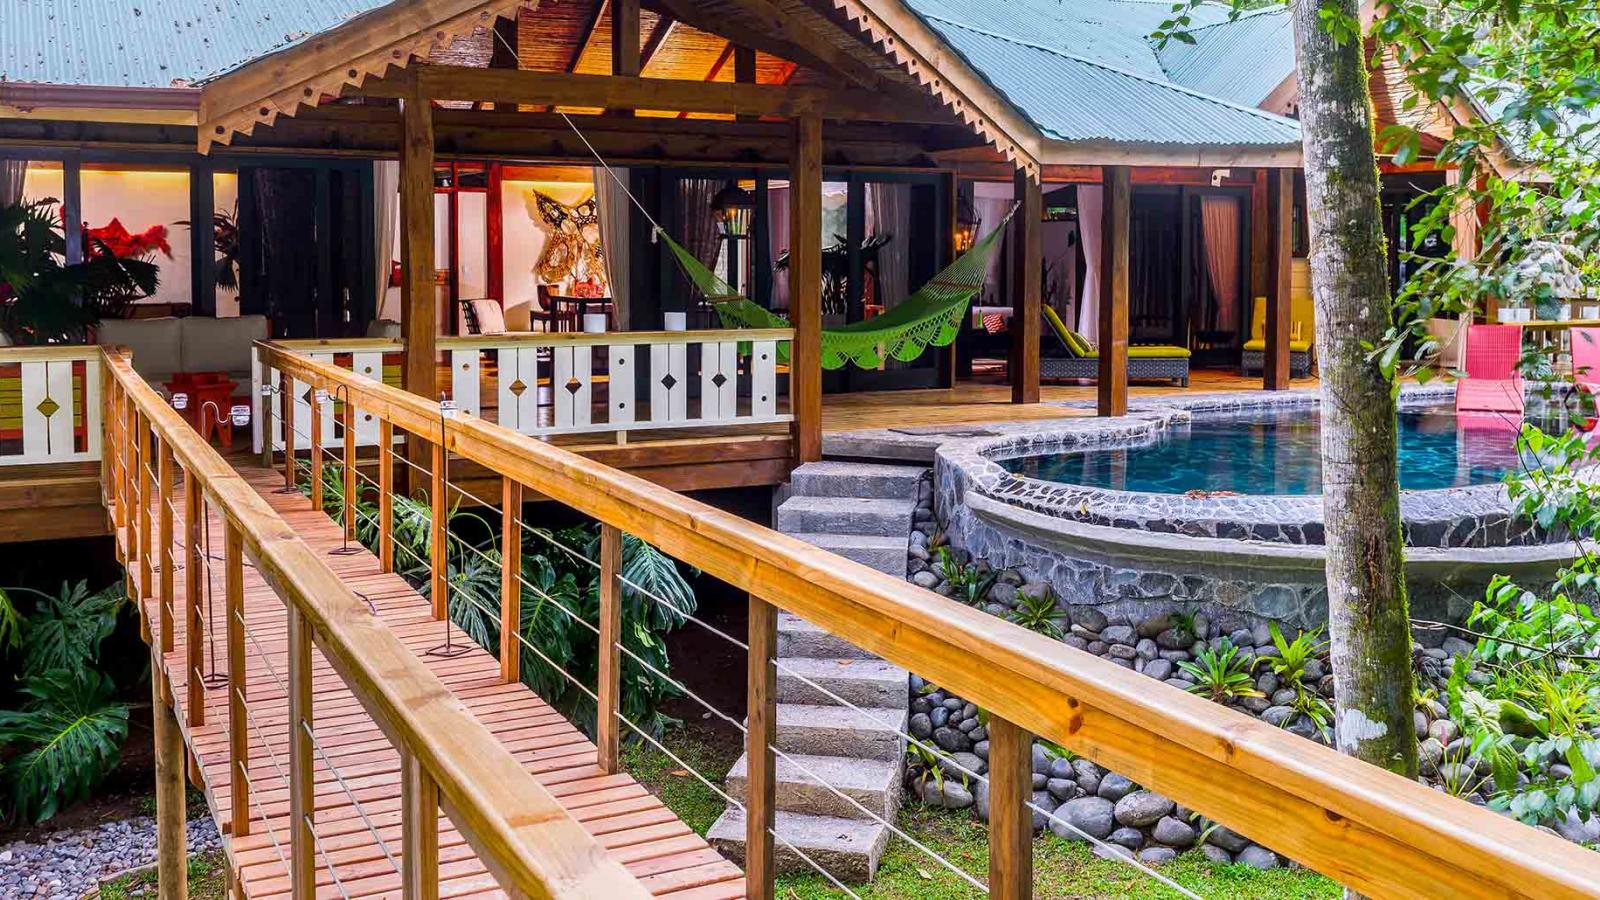 Our experience of Pacuare Lodge in Costa Rica